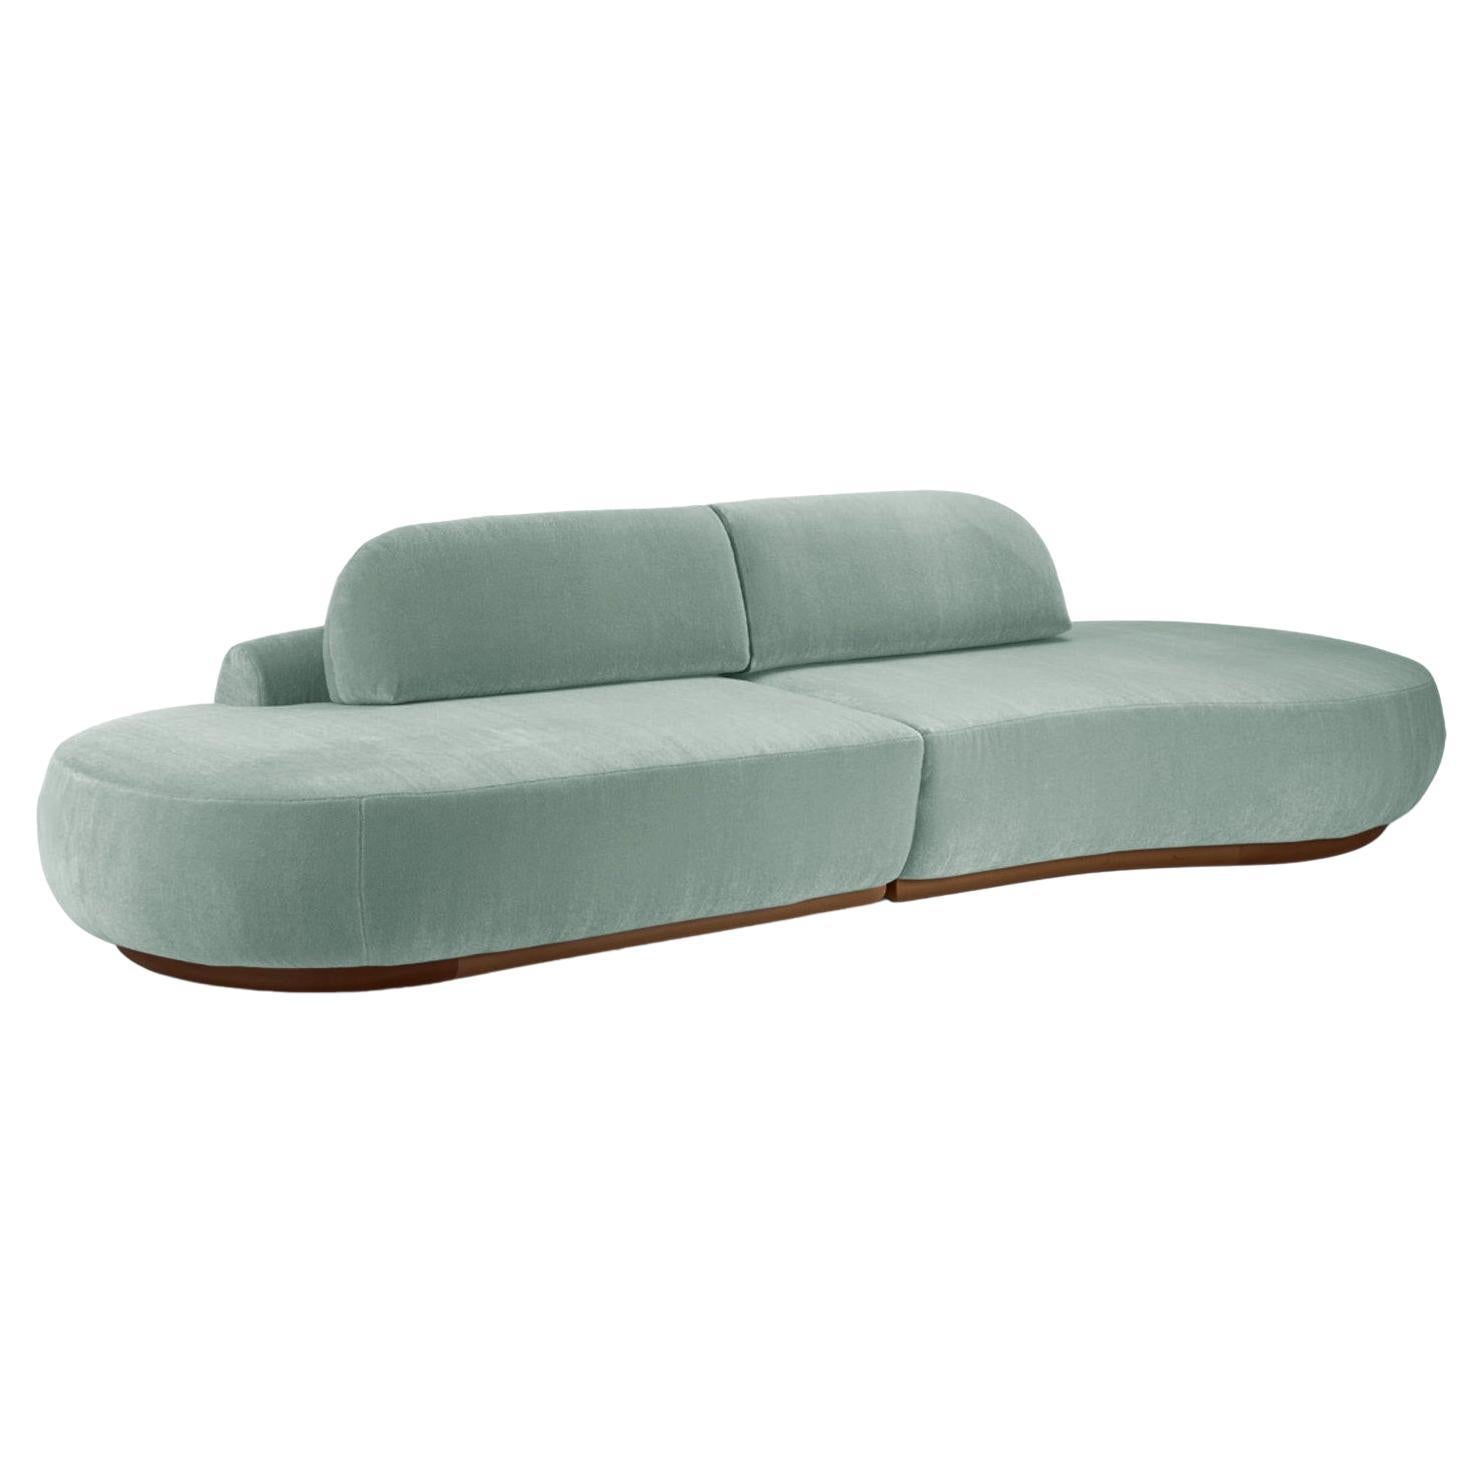 Naked Curved Sectional Sofa, 2 Piece with Beech Ash-056-1 and Smooth 60 For Sale